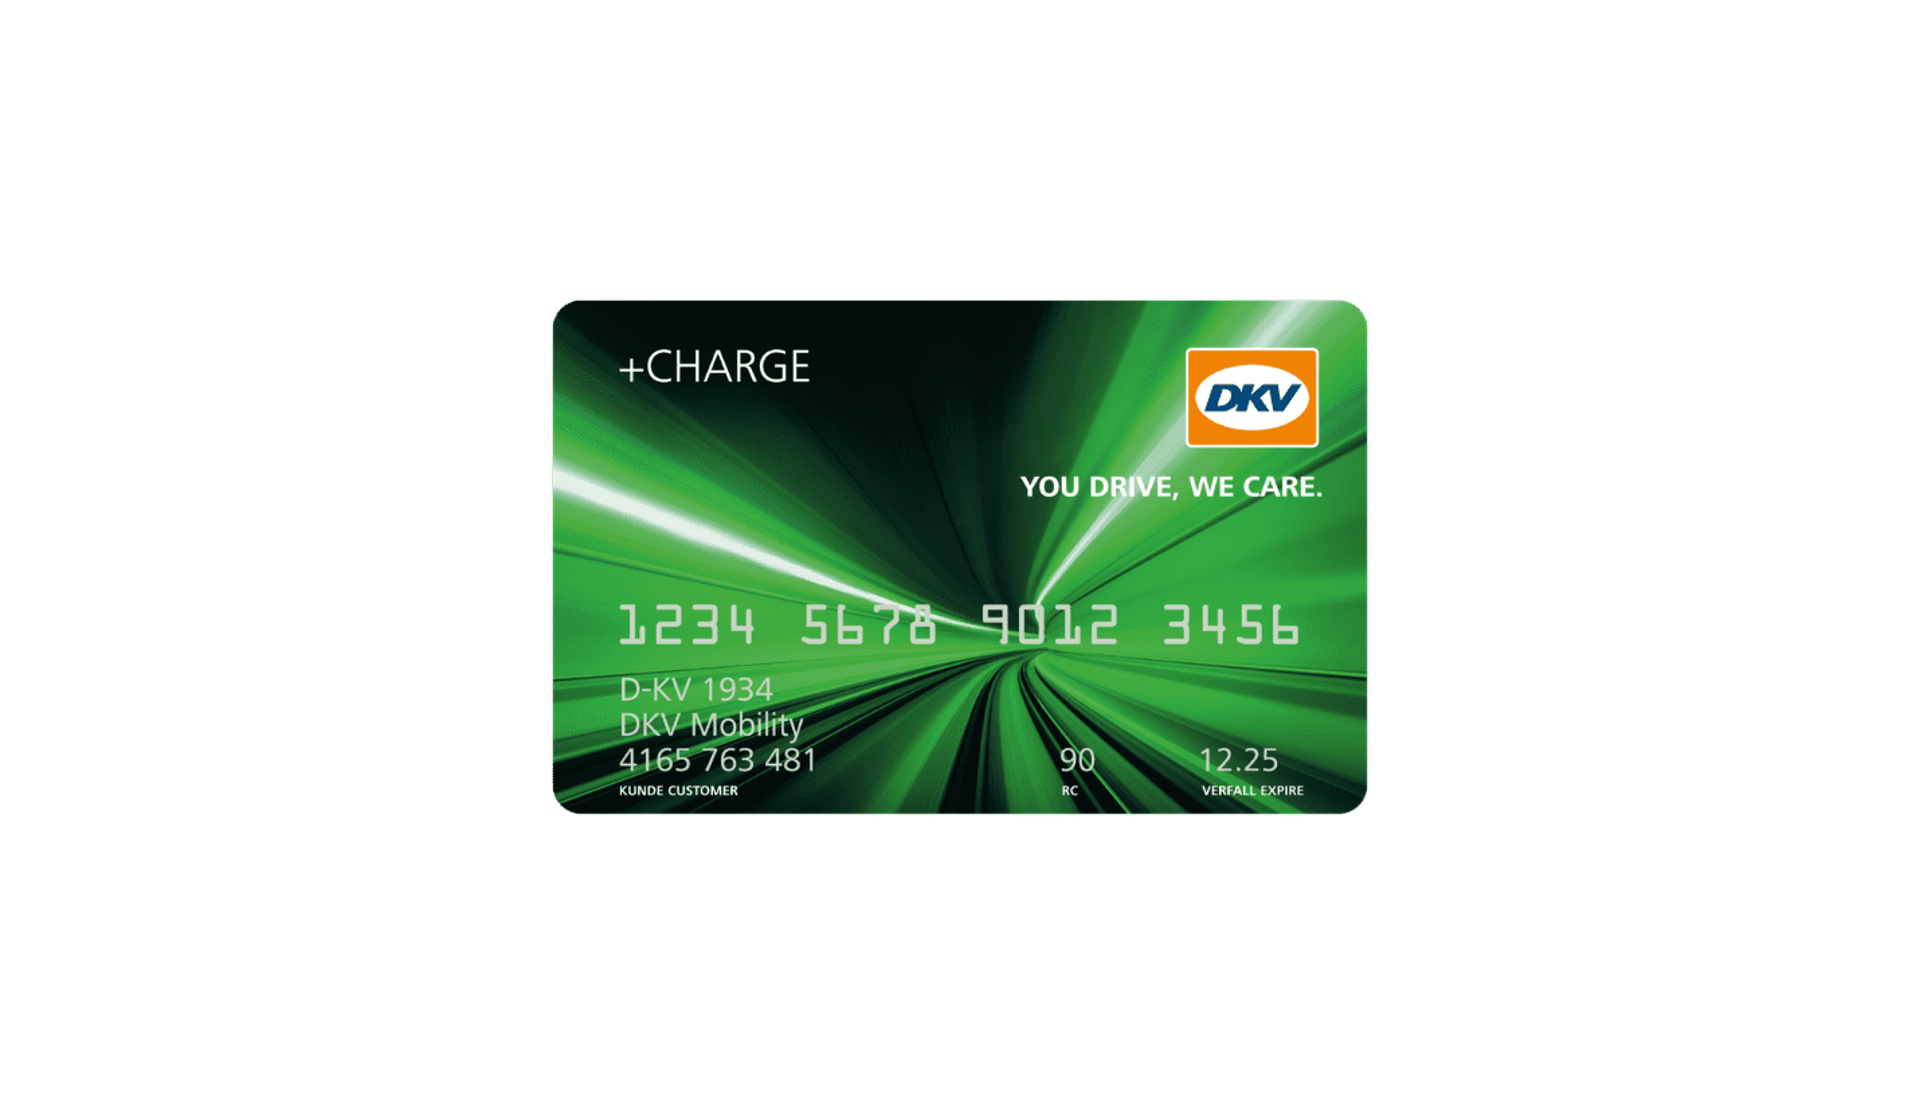 DKV Card +Charge